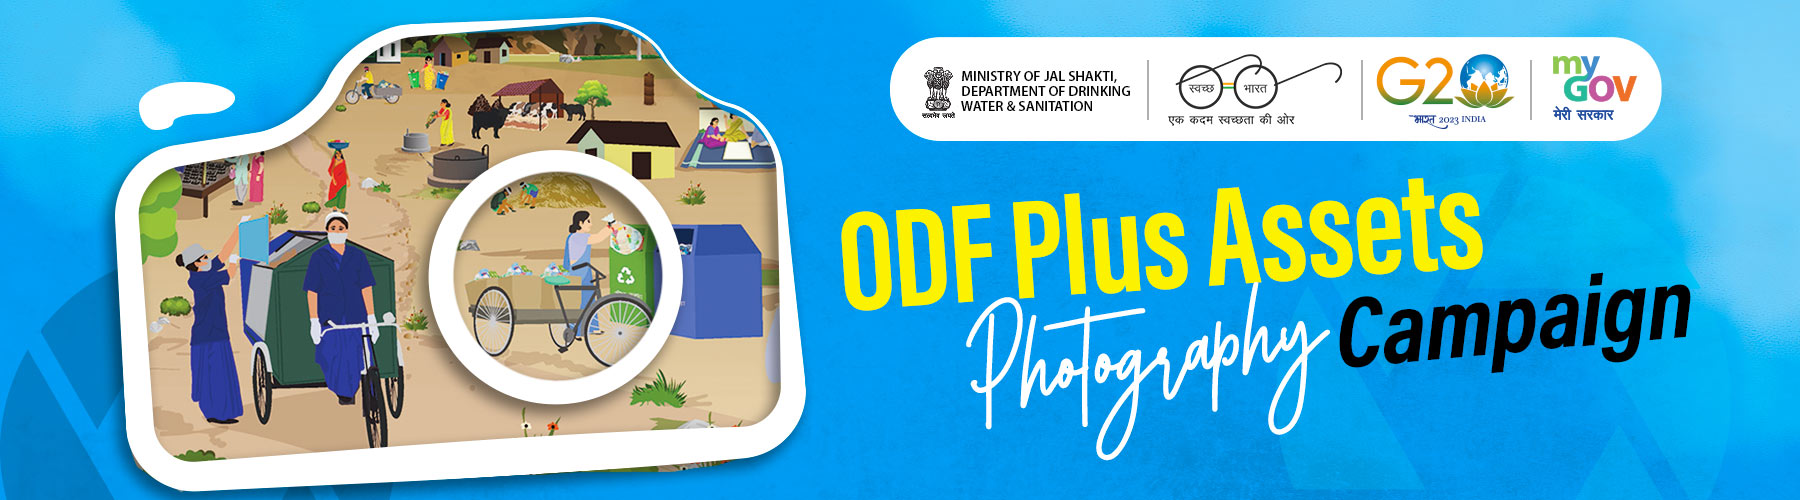 ODF Plus Assets photography Campaign